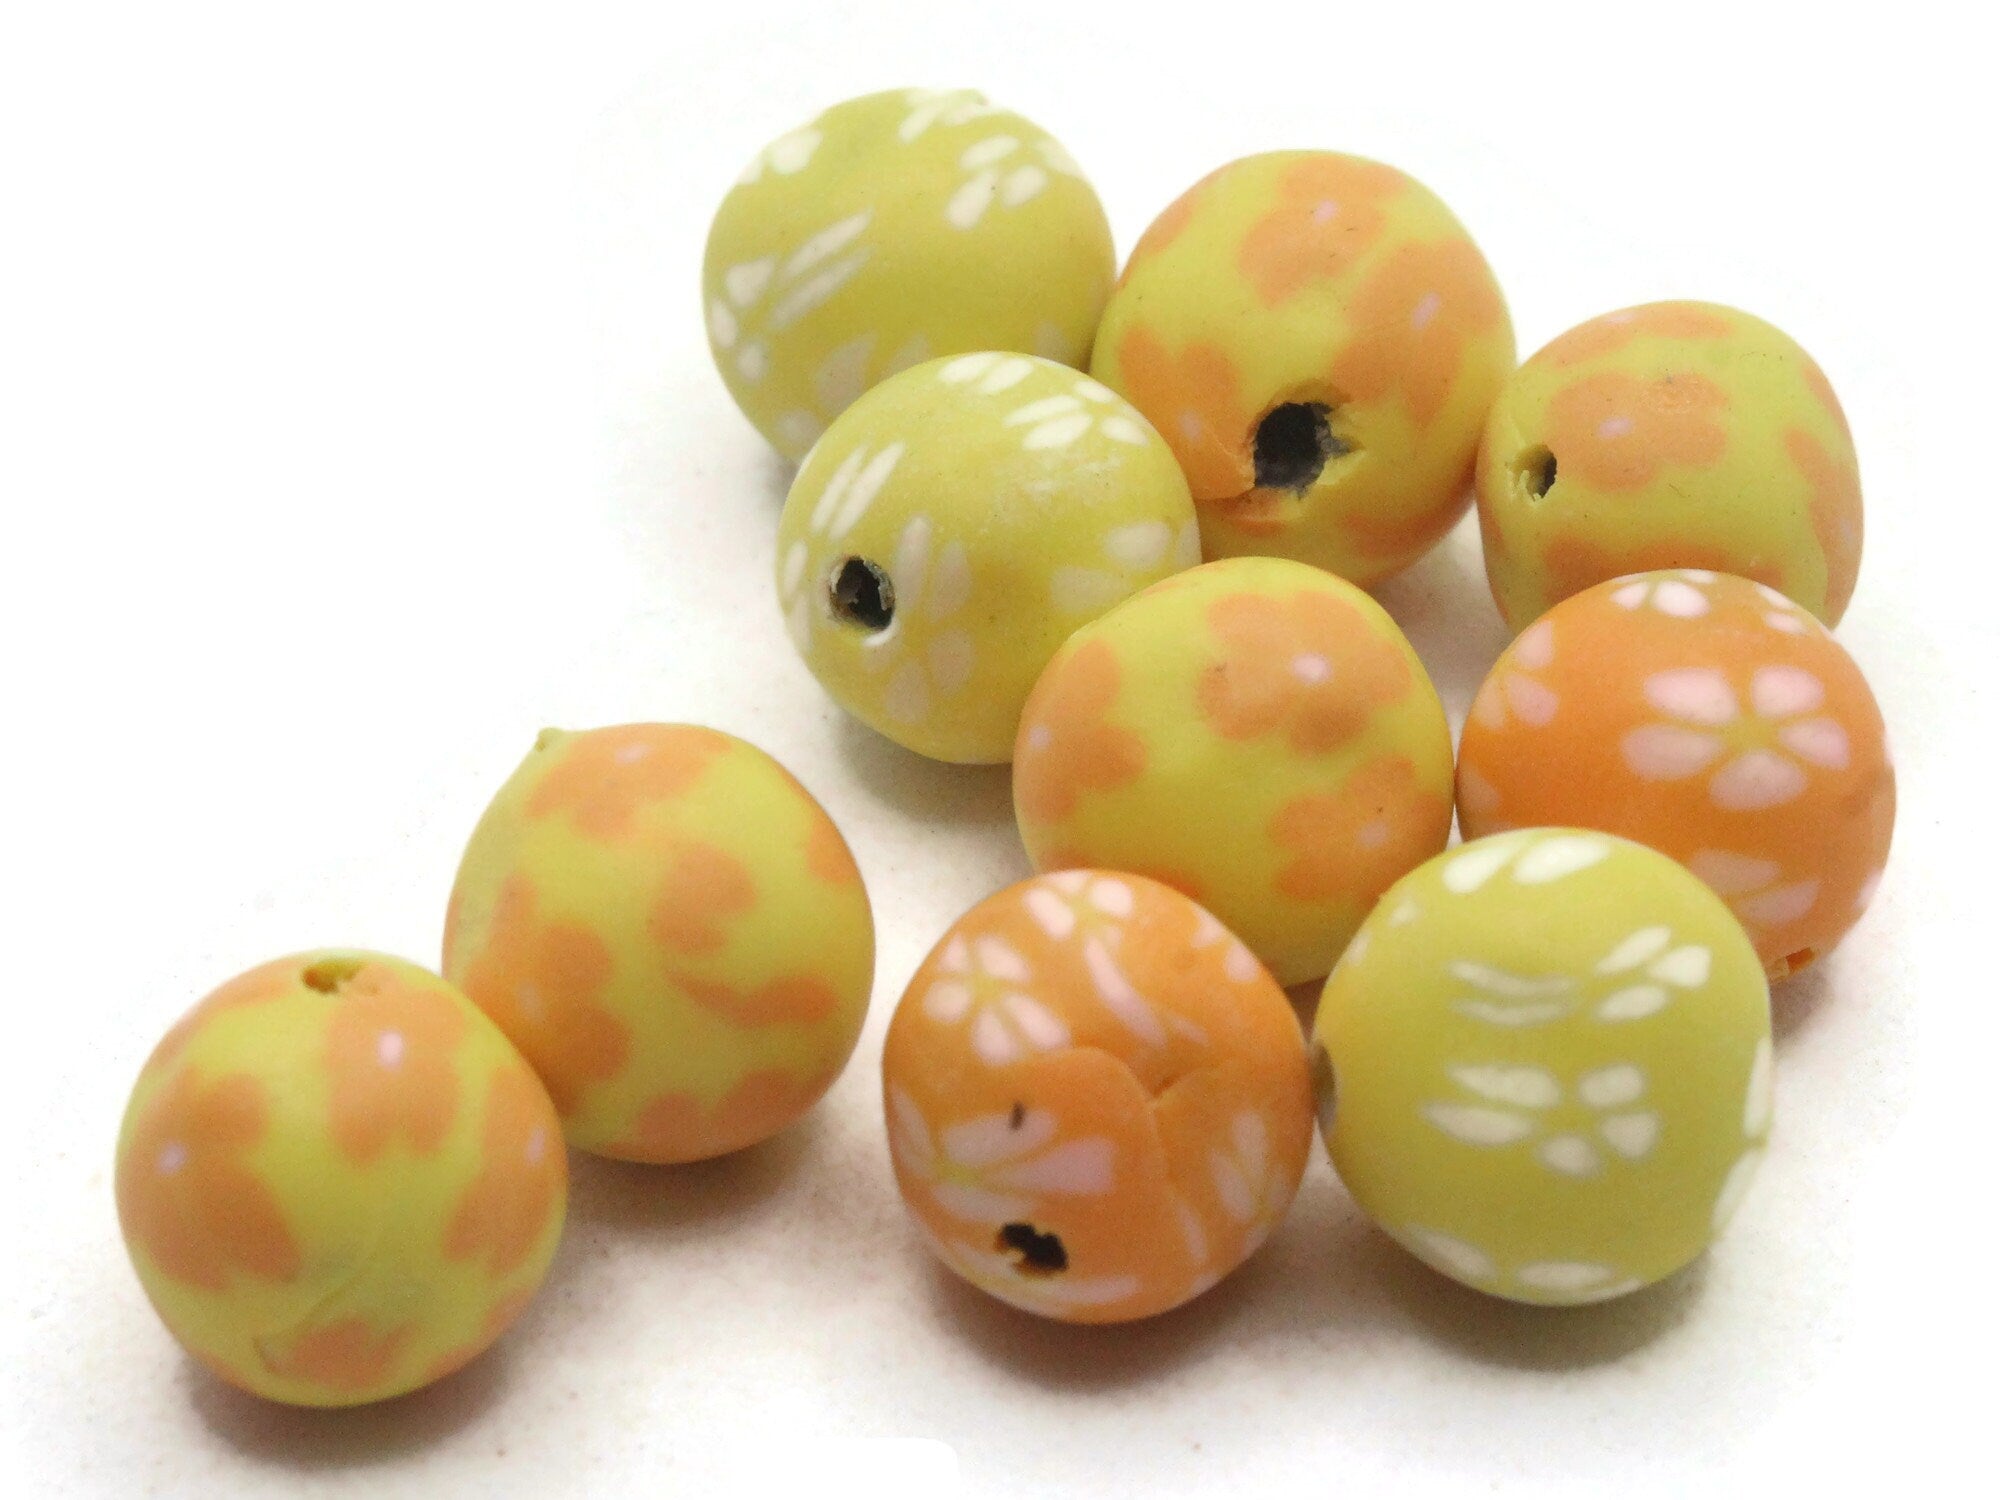 Polymer Clay Round Flower Beads Assorted Color 6mm-16mm – VeryCharms